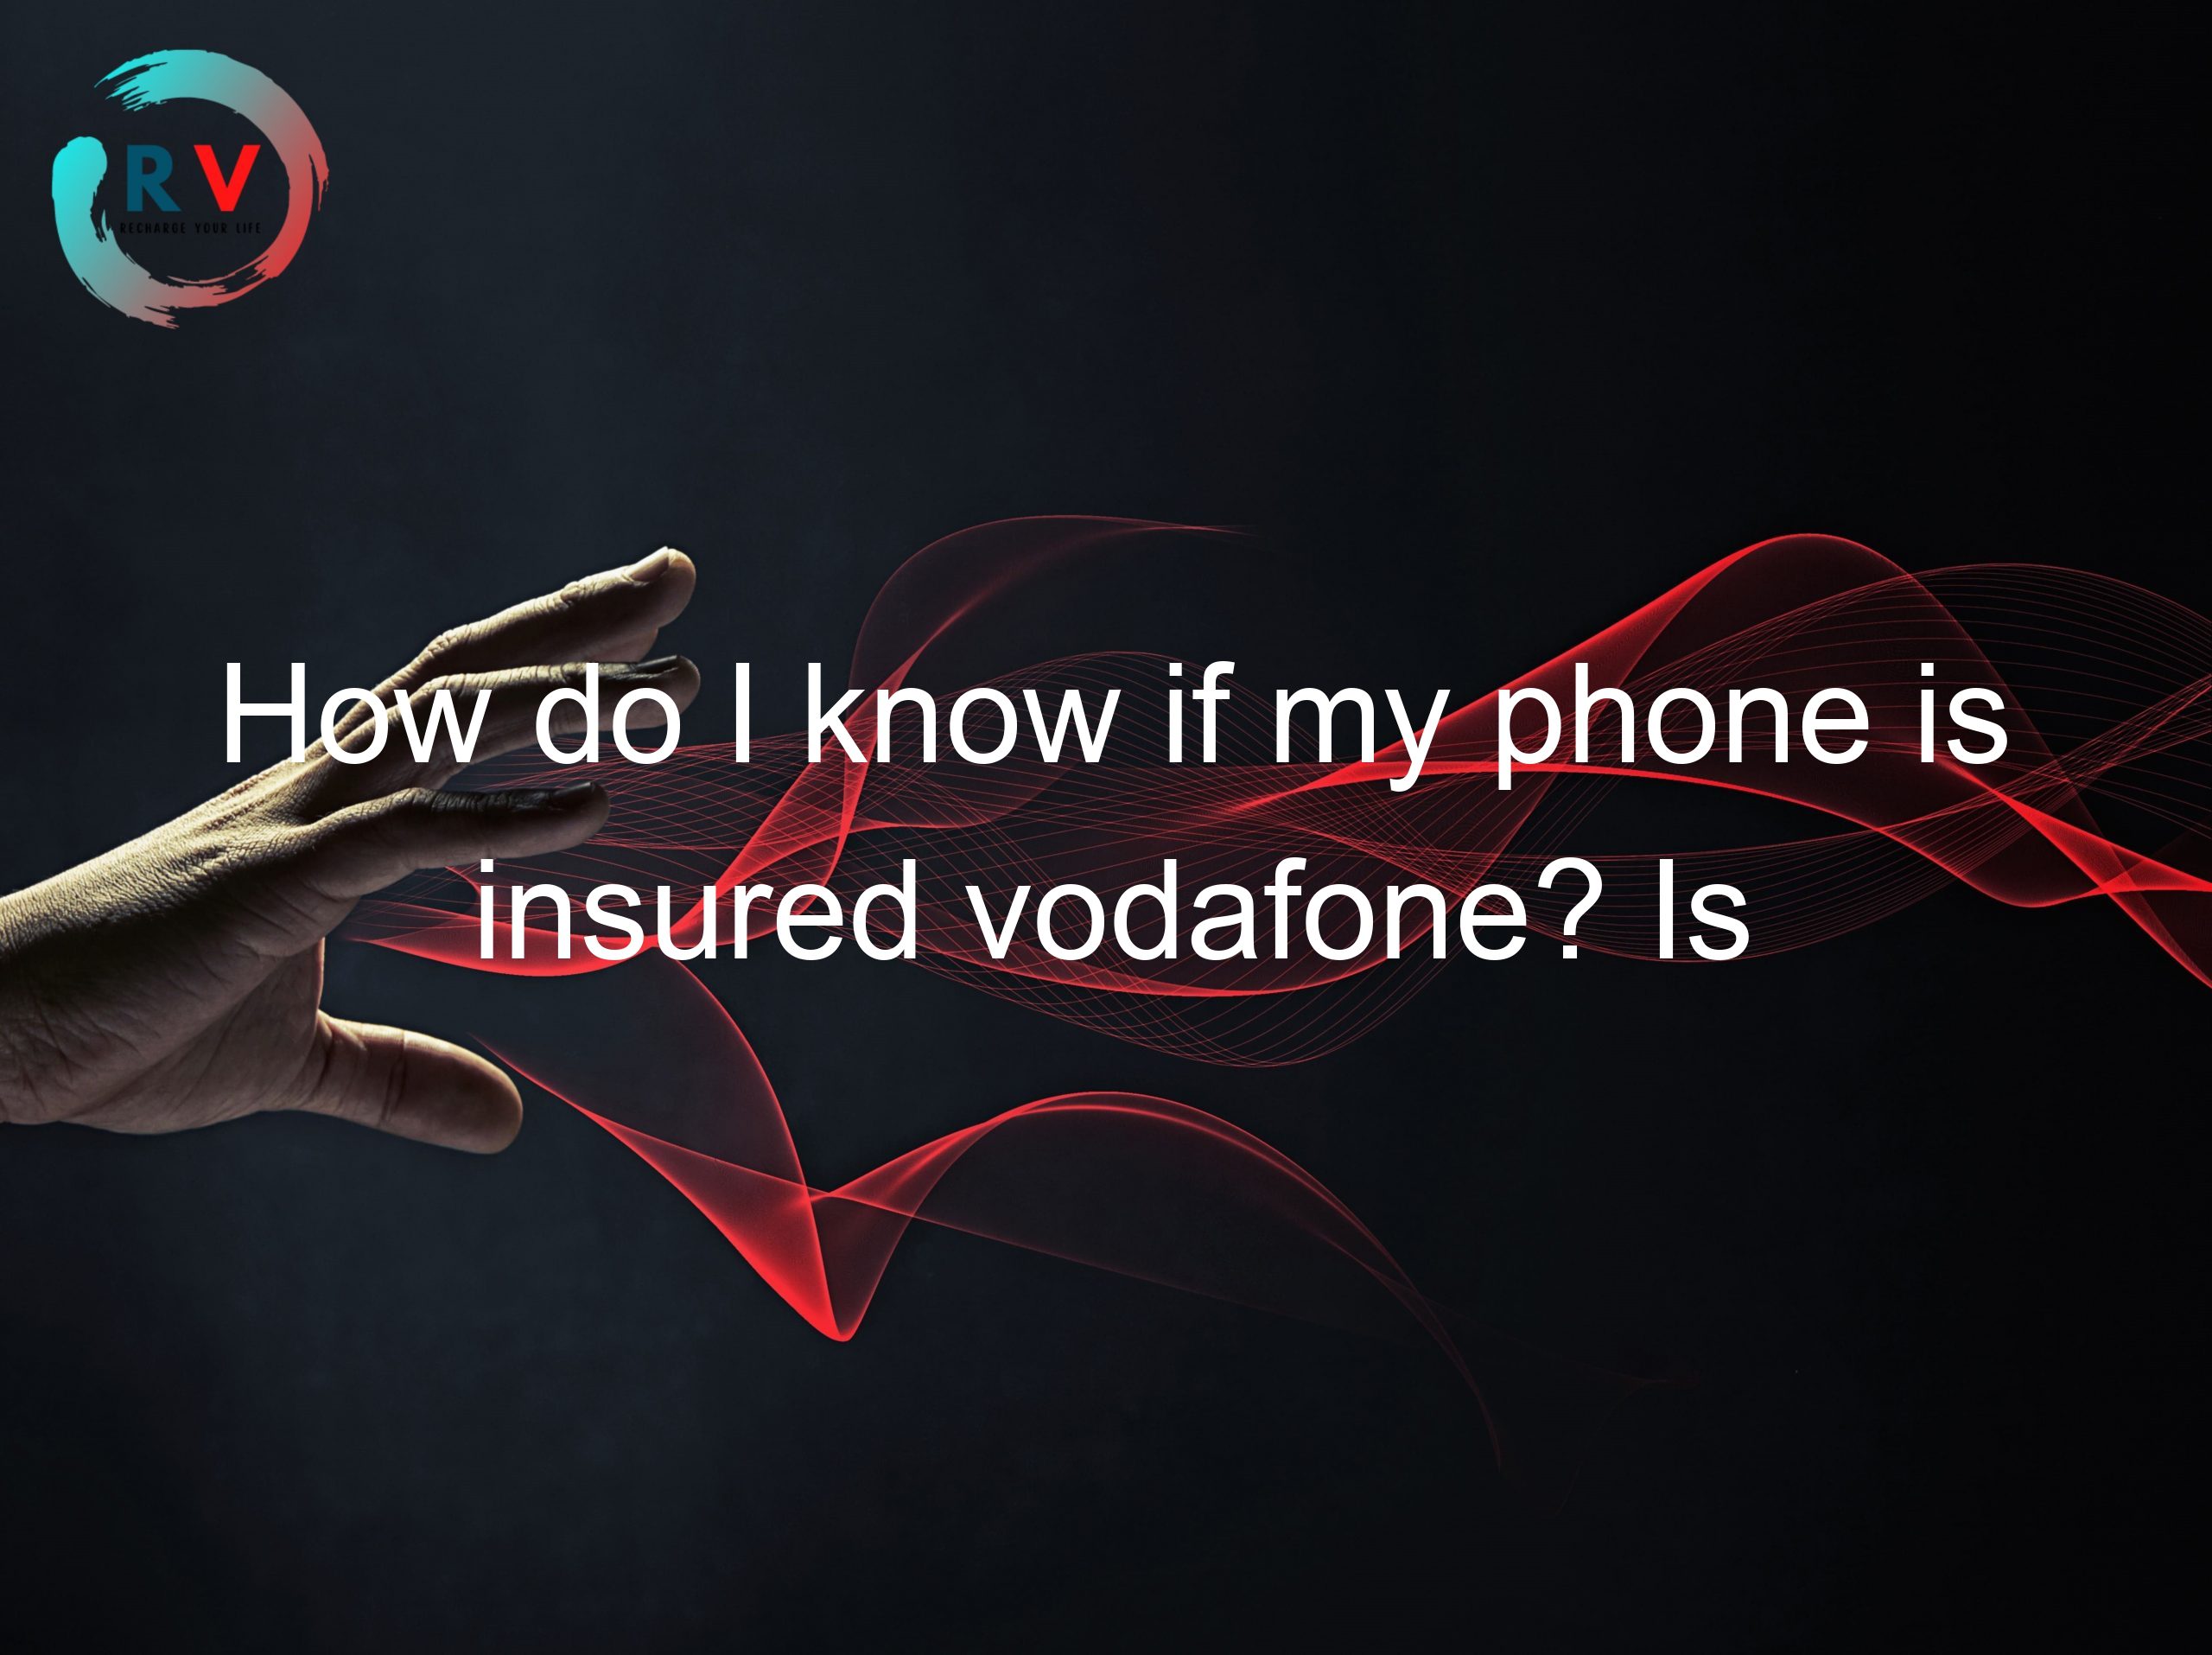 How do I know if my phone is insured vodafone? Is your phone insured vodafone? Here's how to find out.